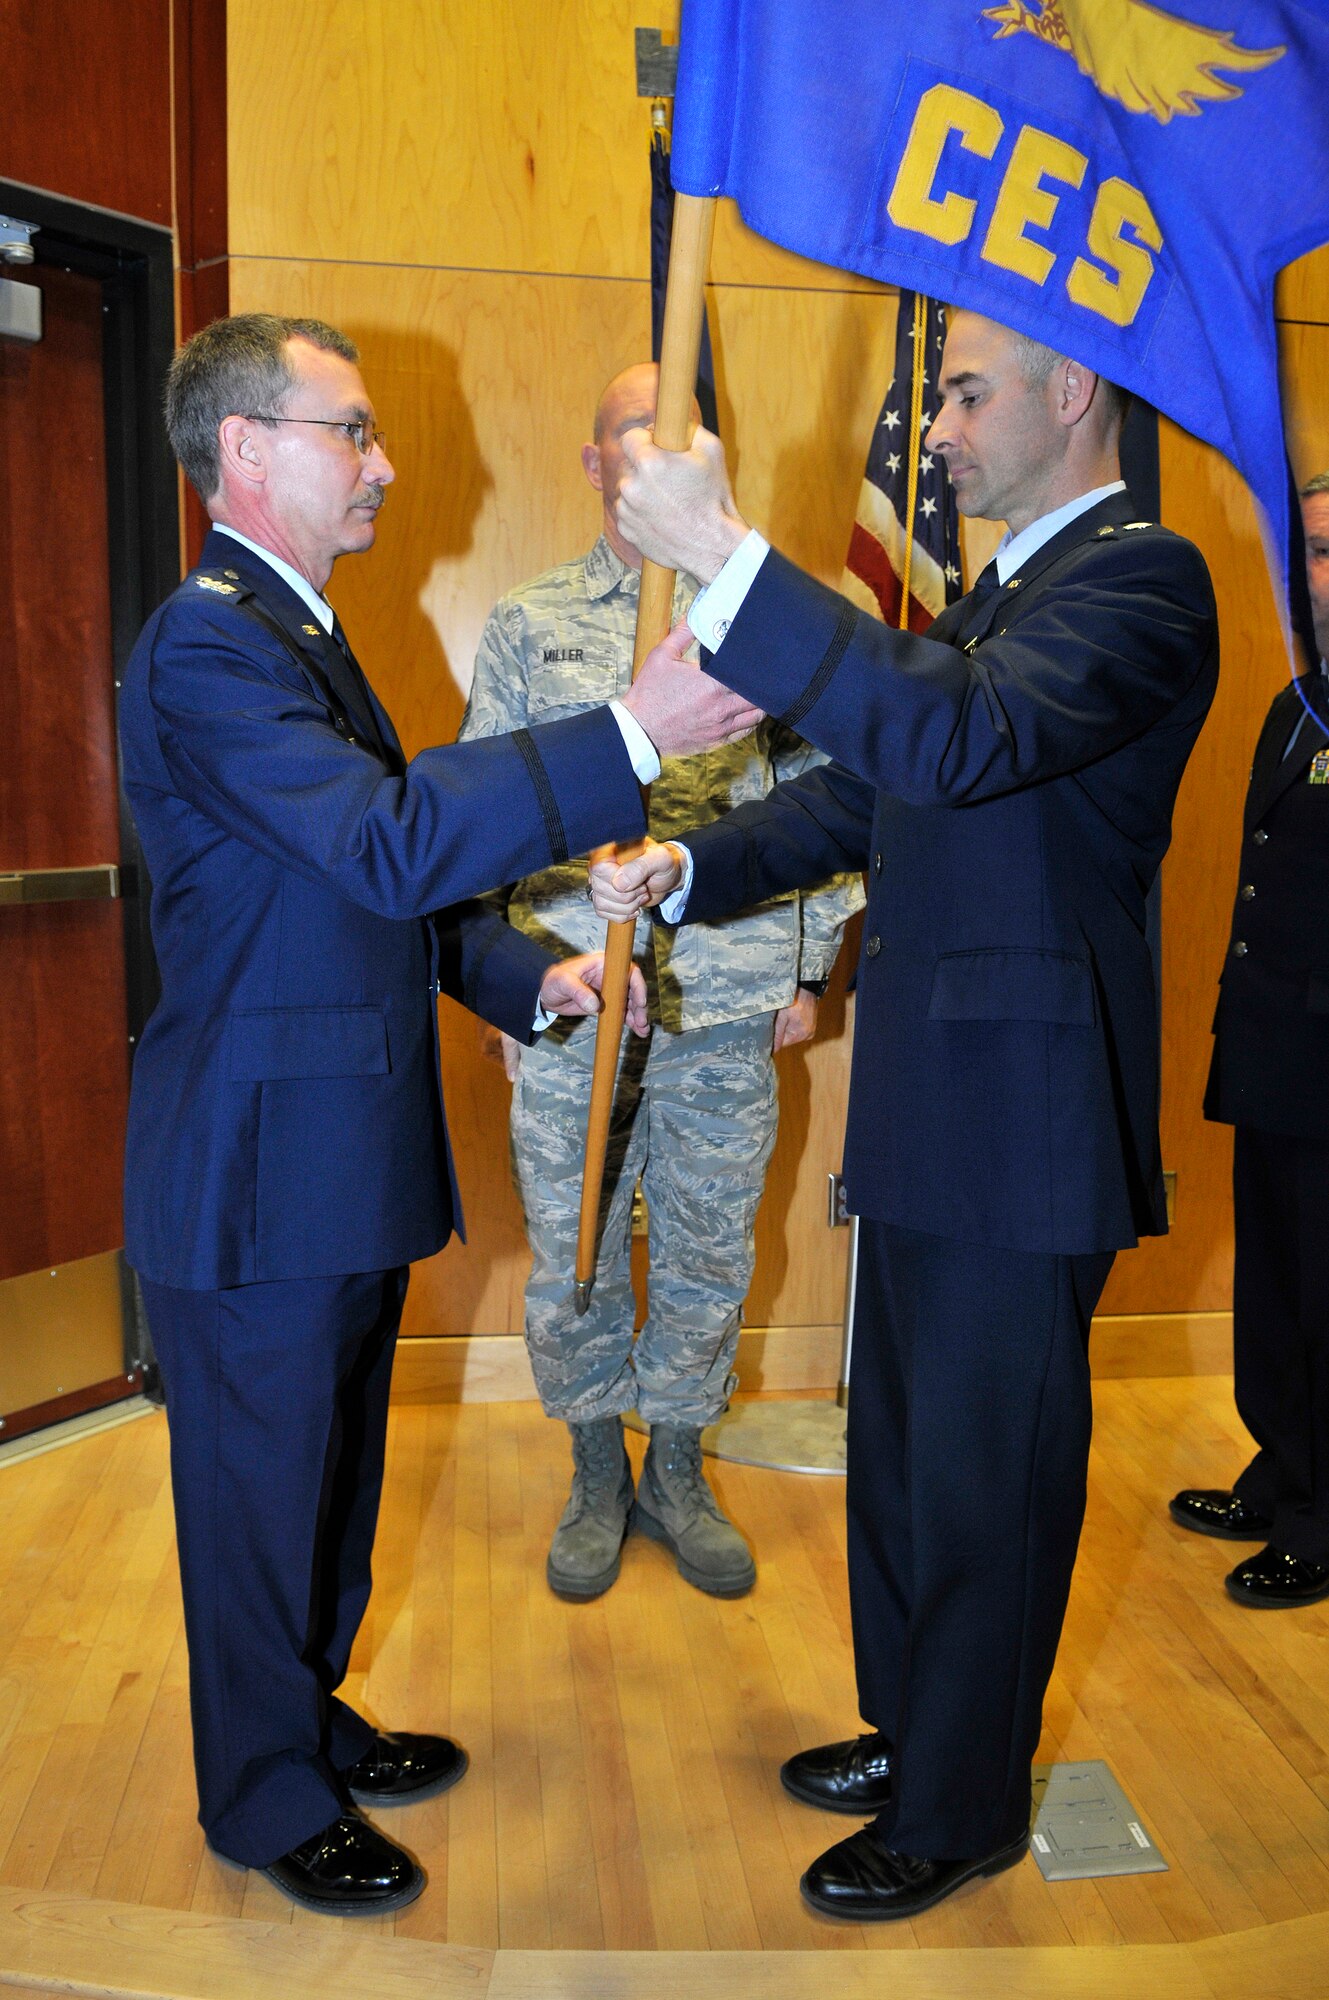 Col. Jack Wall, 151st Mission Support Group commander, accepts the 151st Civil Engineering Squadron guidon from Lt. Col. Anthony Faaborg as he relinquishes command of the 151st CES during the change of command ceremony at the Utah Air National Guard Base in Salt lake City, Utah, March 3. (U.S. Air Force Photo by Tech. Sgt. Jeremy Giacoletto-Stegall/Released)